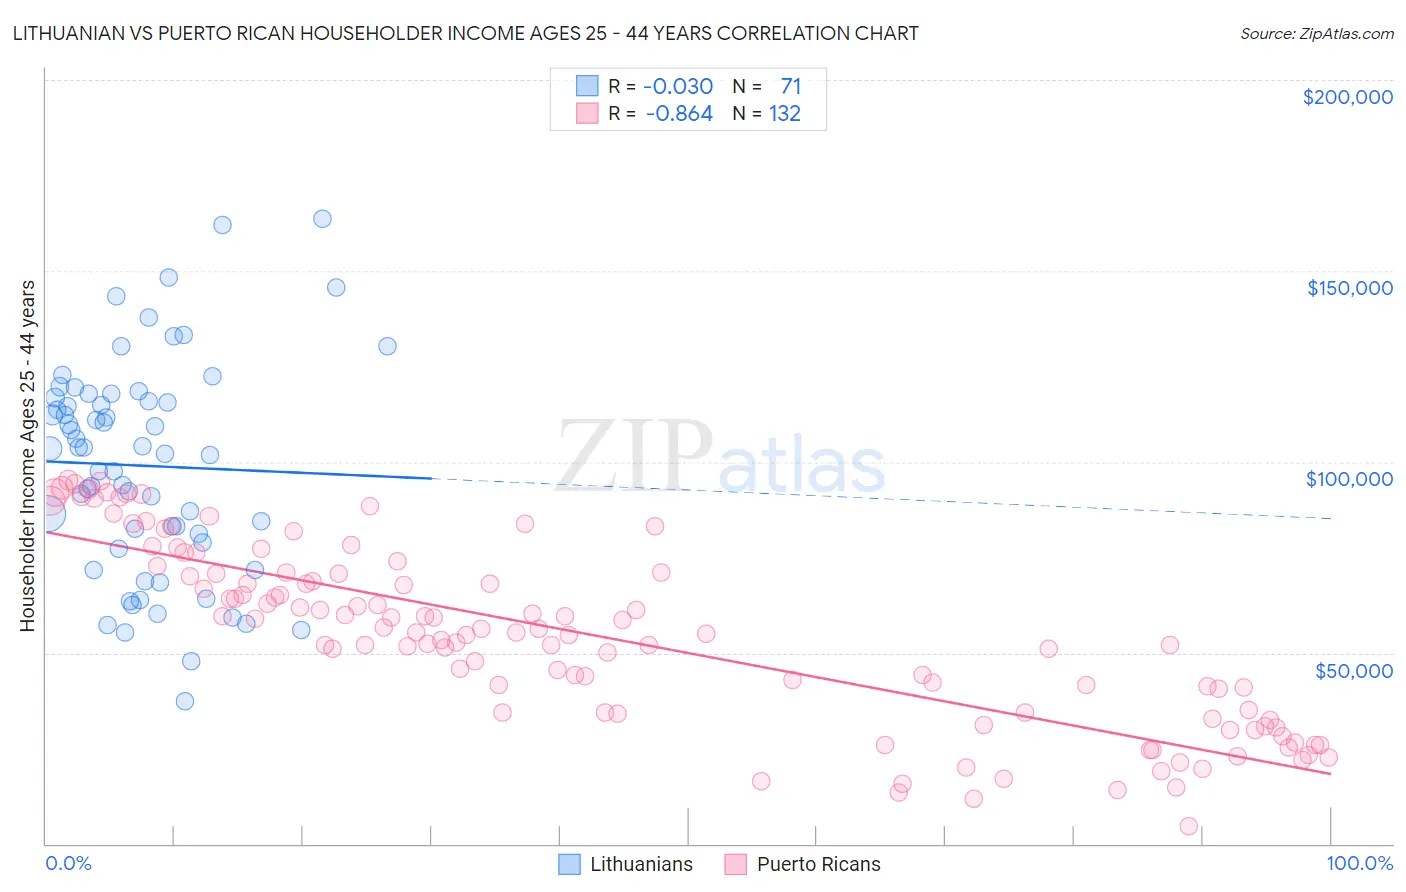 Lithuanian vs Puerto Rican Householder Income Ages 25 - 44 years